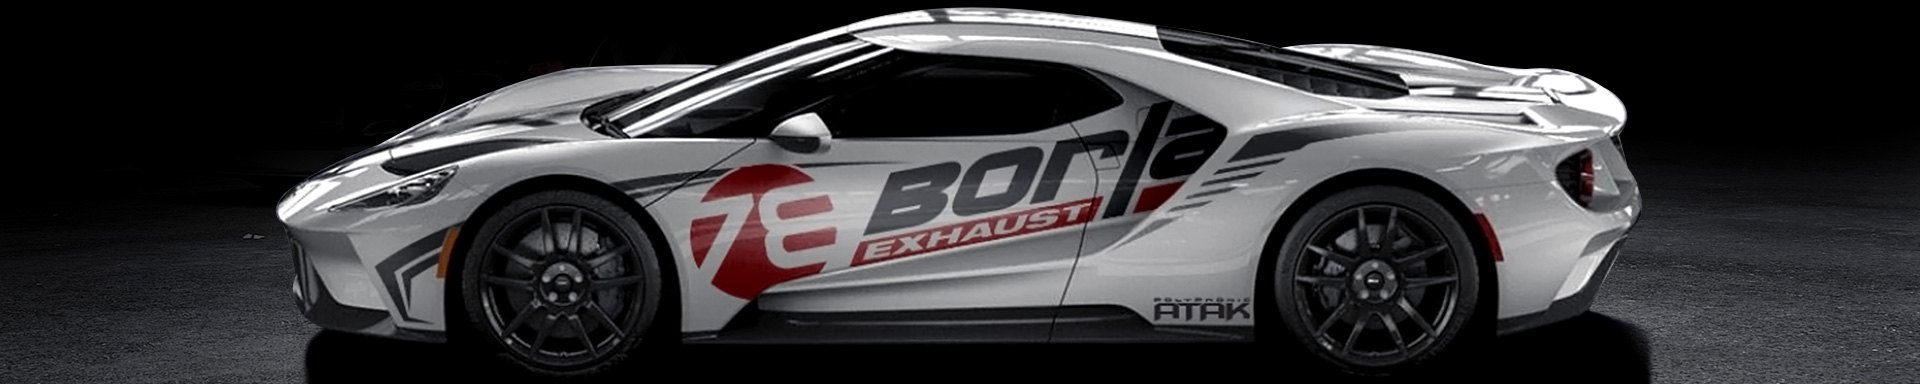 Peak Performance with Top Level Borla Custom Exhaust for Ford GT